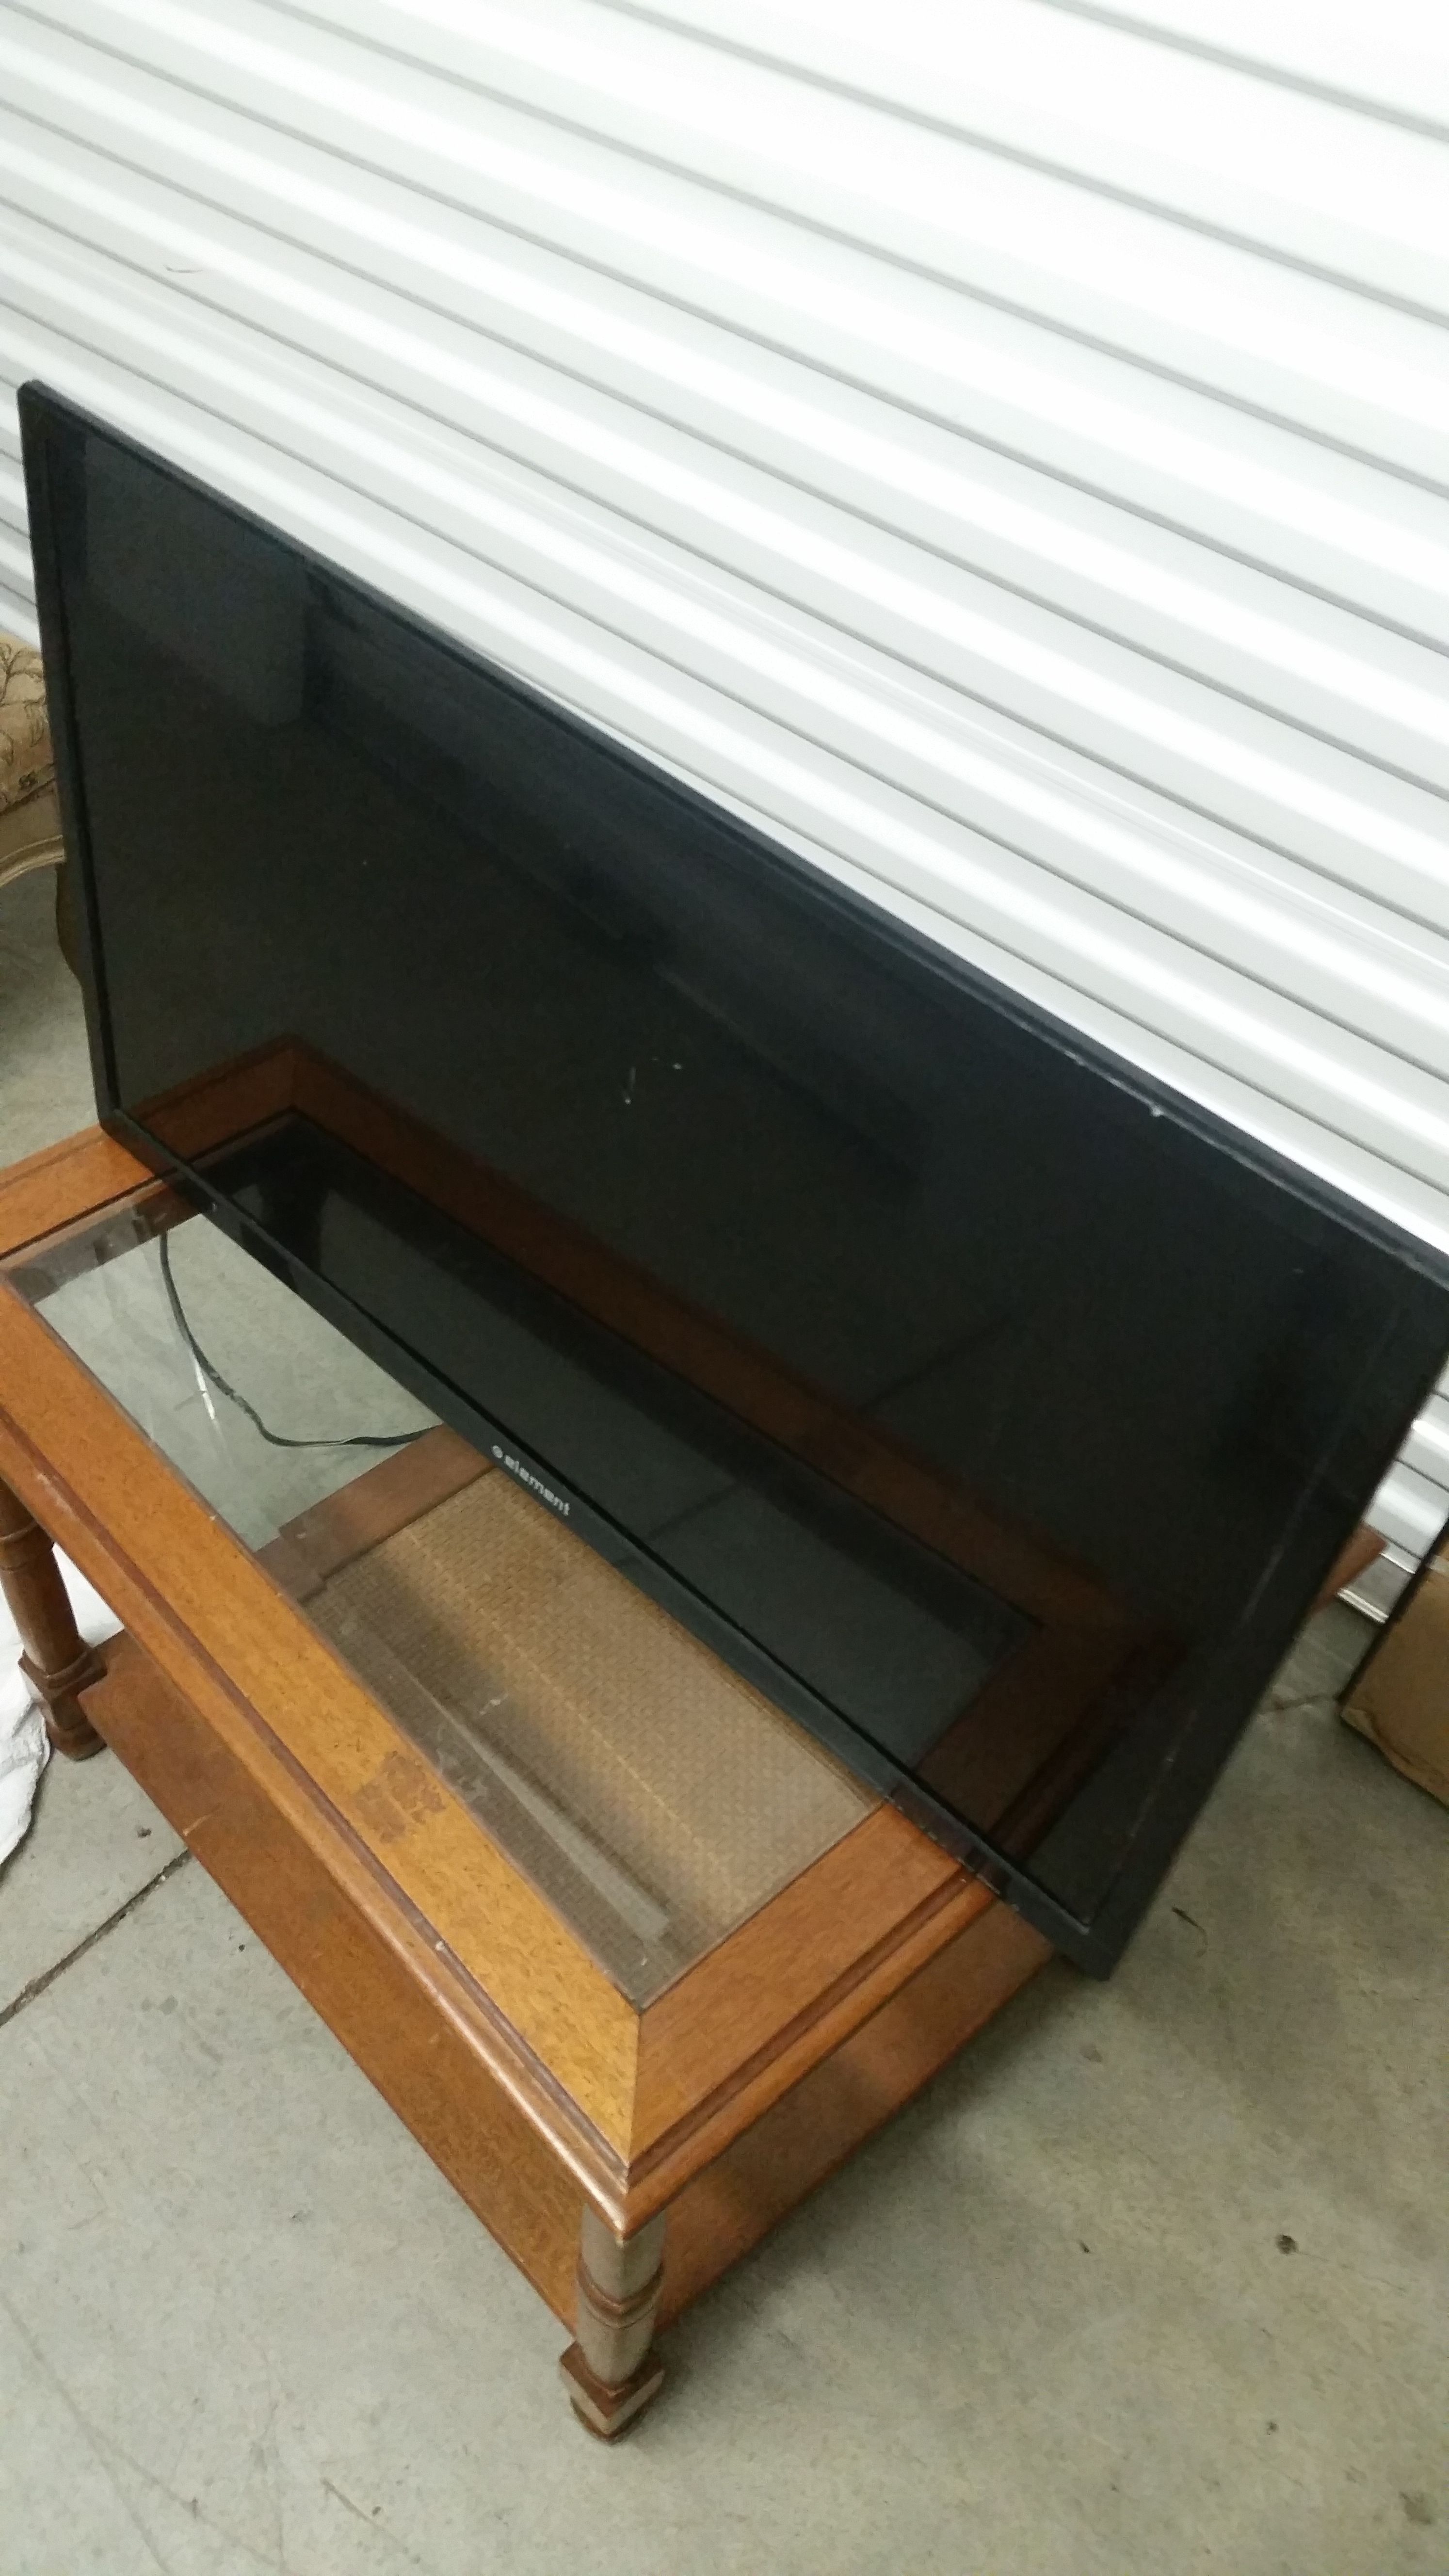 32 inch Element Flat screen TV without remote for $40 Reduced